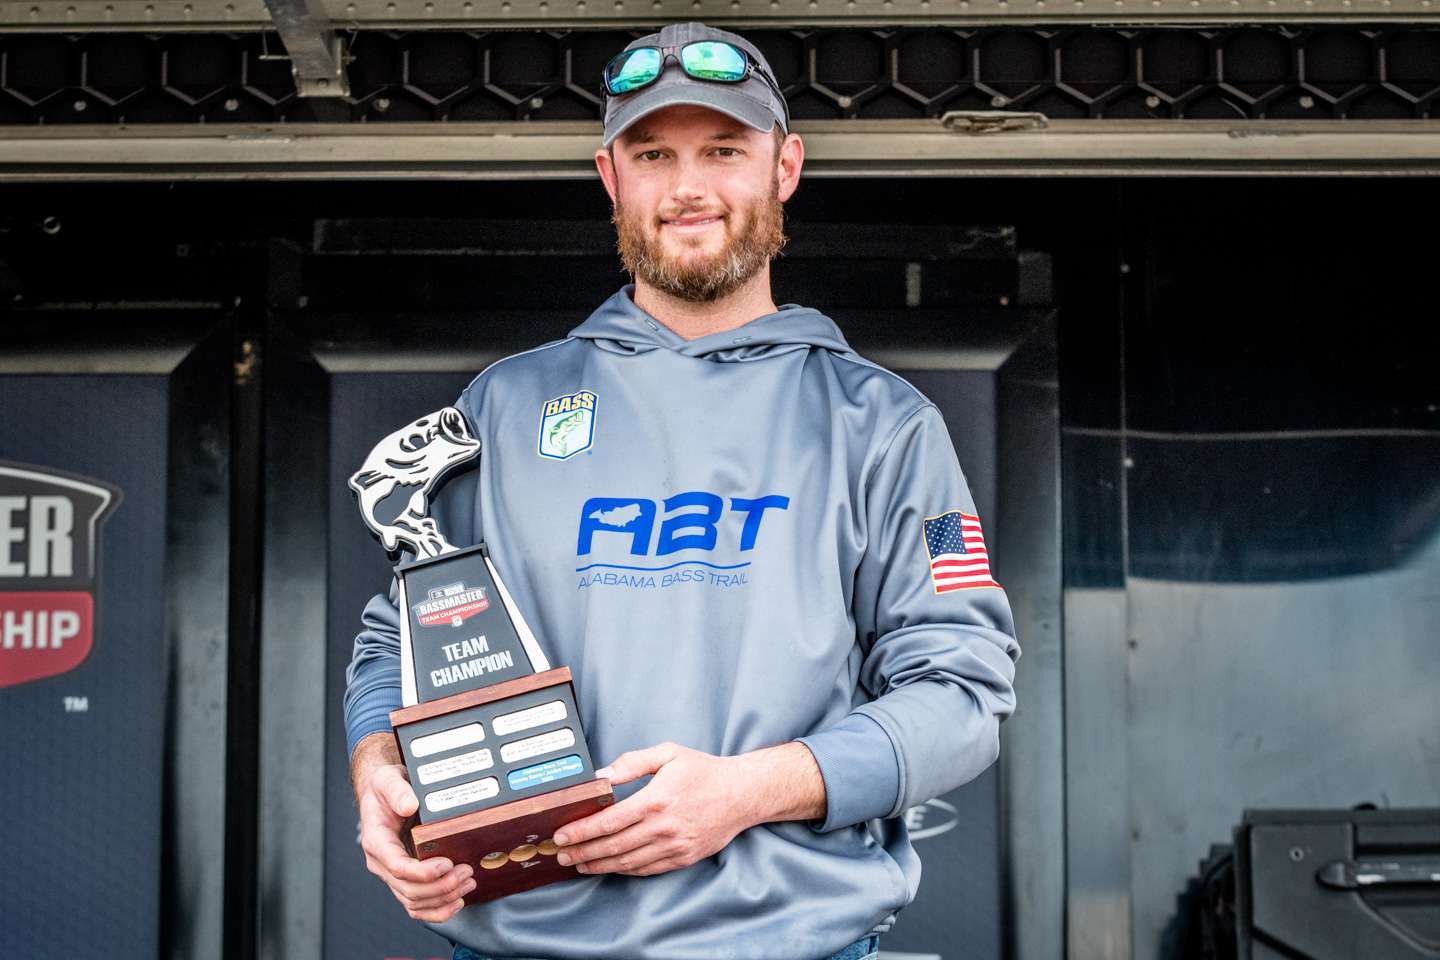 

<h4>Shane Powell (100-1)</h4>
<p><b>Dothan, Alabama</b><br />
Fishing the Super Bowl of Professional Bass Fishing is an incredible honor for the Bassmaster Team Championship qualifier. But winning through that route might also be the tallest task in the sport. After conquering a tough Classic Fish-Off at Lake Eufaula, Powell said he’d never fished Lake Hartwell. That makes it even tougher. But great things sometimes happen when a guy can fish with no expectations — and no pressure.<br />
” class=”wp-image-567979″ width=”1440″ height=”960″/><figcaption>
<h4>Shane Powell (100-1)</h4>
<p><b>Dothan, Alabama</b><br />
Fishing the Super Bowl of Professional Bass Fishing is an incredible honor for the Bassmaster Team Championship qualifier. But winning through that route might also be the tallest task in the sport. After conquering a tough Classic Fish-Off at Lake Eufaula, Powell said he’d never fished Lake Hartwell. That makes it even tougher. But great things sometimes happen when a guy can fish with no expectations — and no pressure.<br />
</figcaption></figure>
<div class=